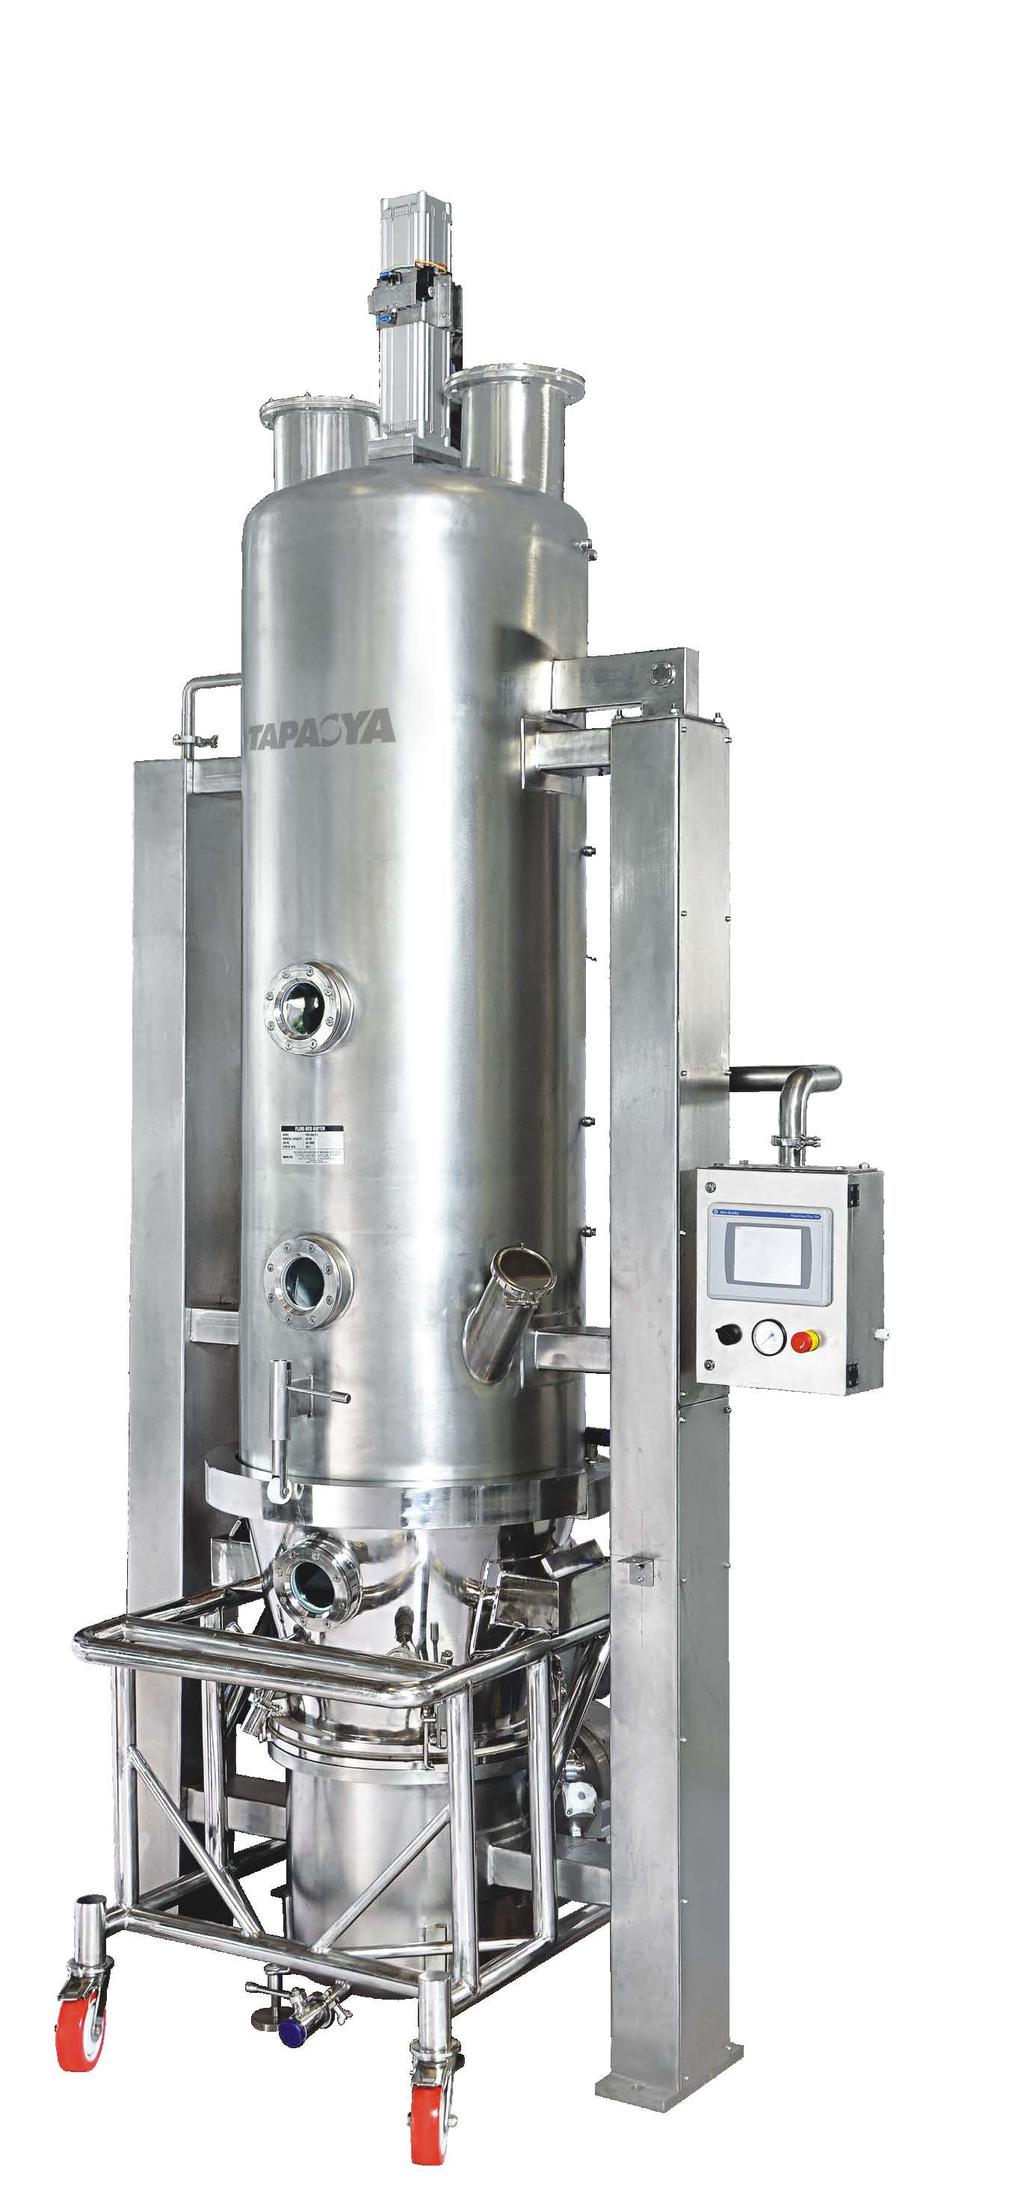 Drying FLUID BED EQUIPMENT Tapasya s Fluid Bed Equipment (FBE) is specially designed unit for agglomeration and simultaneous drying for top spray granulation conforming to the